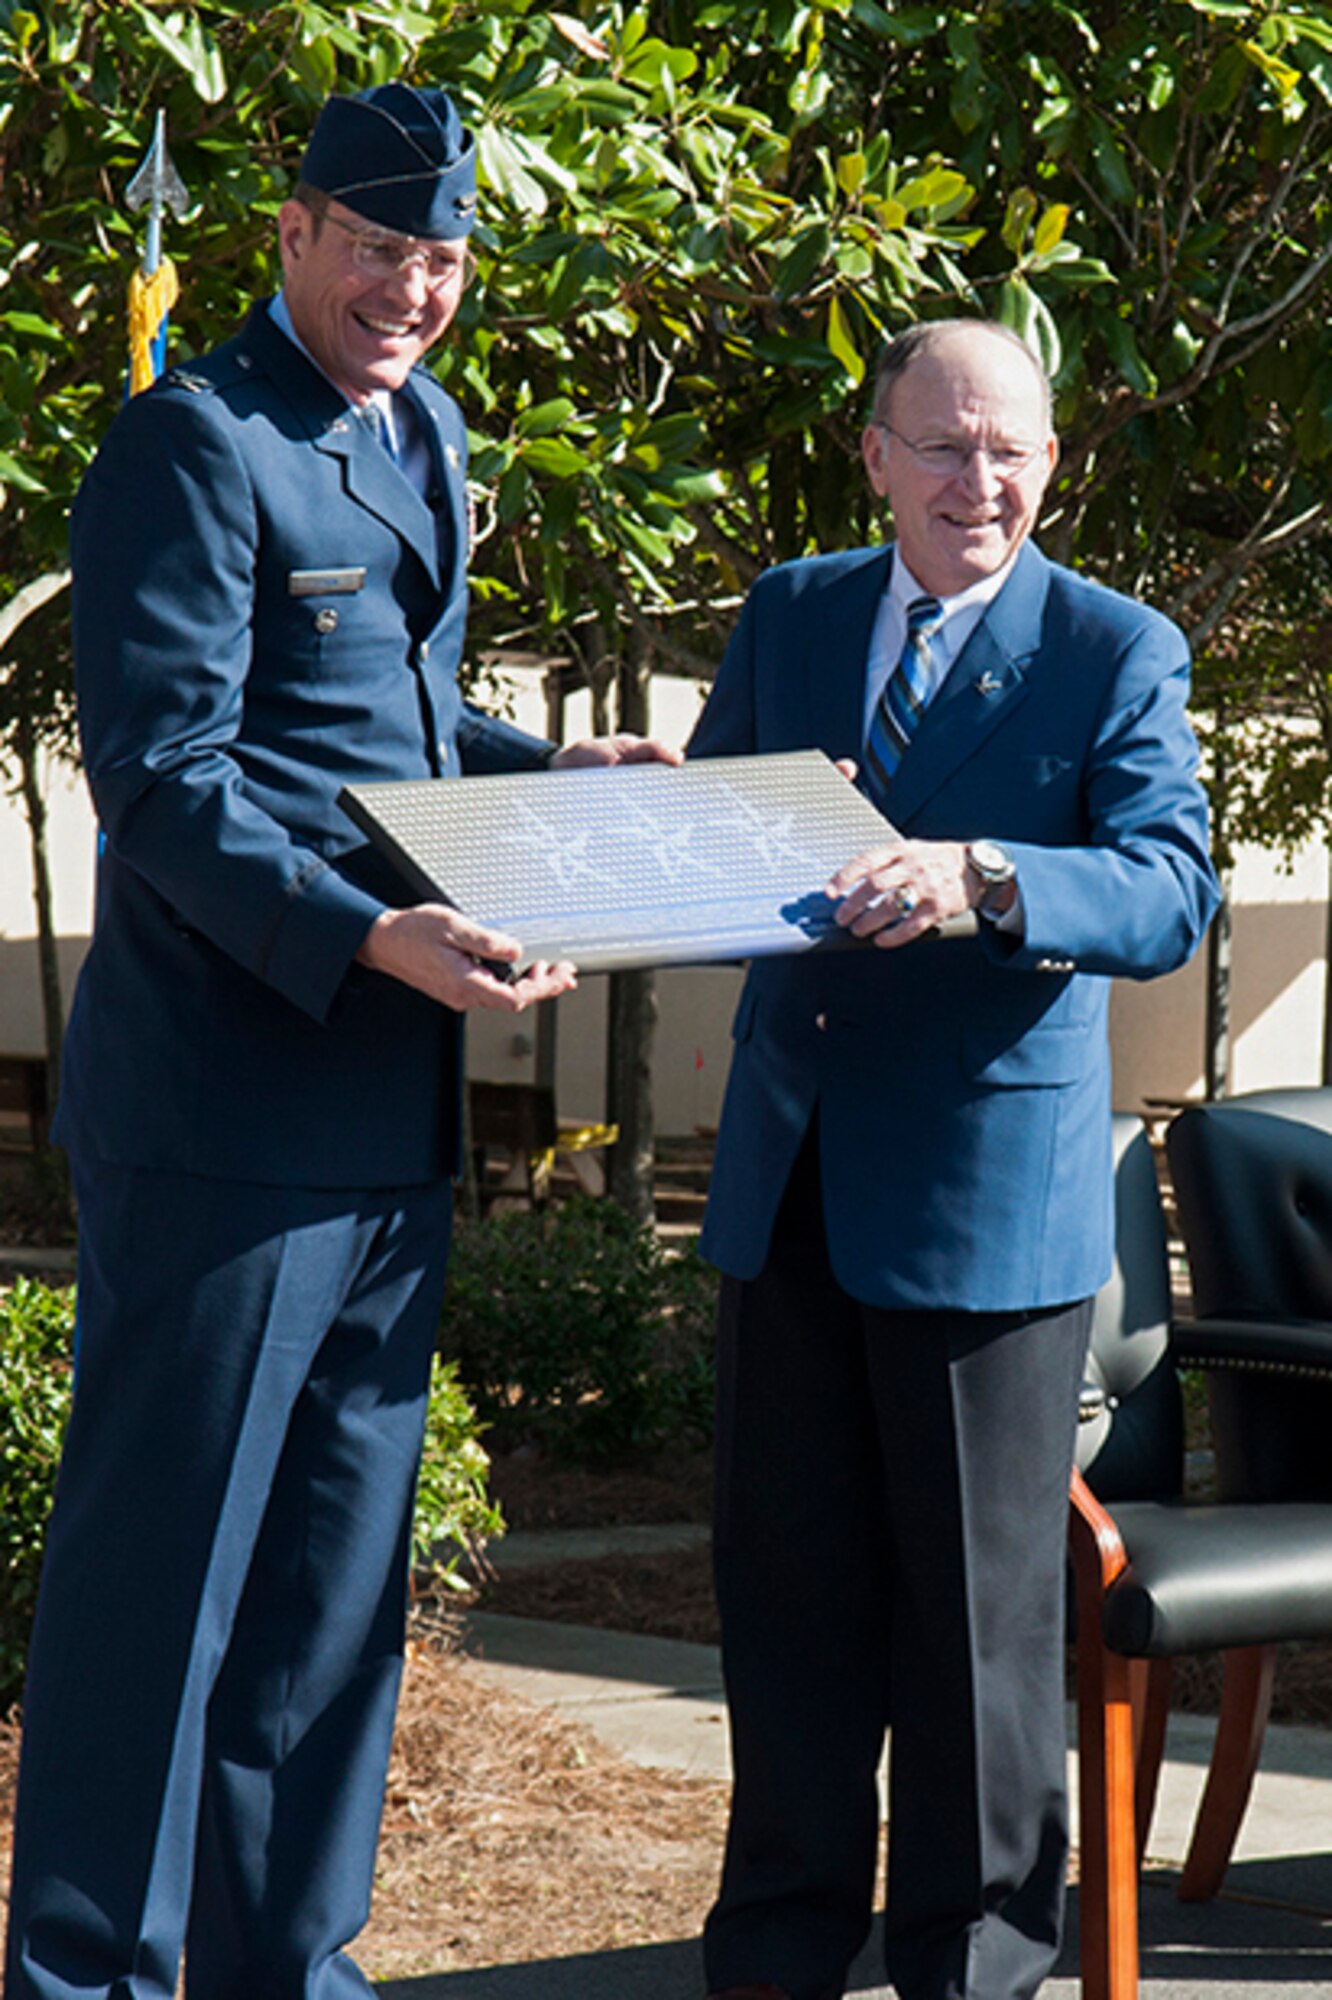 Col. Joel Cook, left, vice commander of the 505th Command and Control Wing, presents retired Lt. Gen. Michael Short with a plaque during a building dedication ceremony at Hurlburt Field, Fla., Dec. 16, 2016. Short, an Air Force Academy graduate who retired from the Air Force in 2000, dedicated more than 50 years of service to the Air Force. (Courtesy photo)